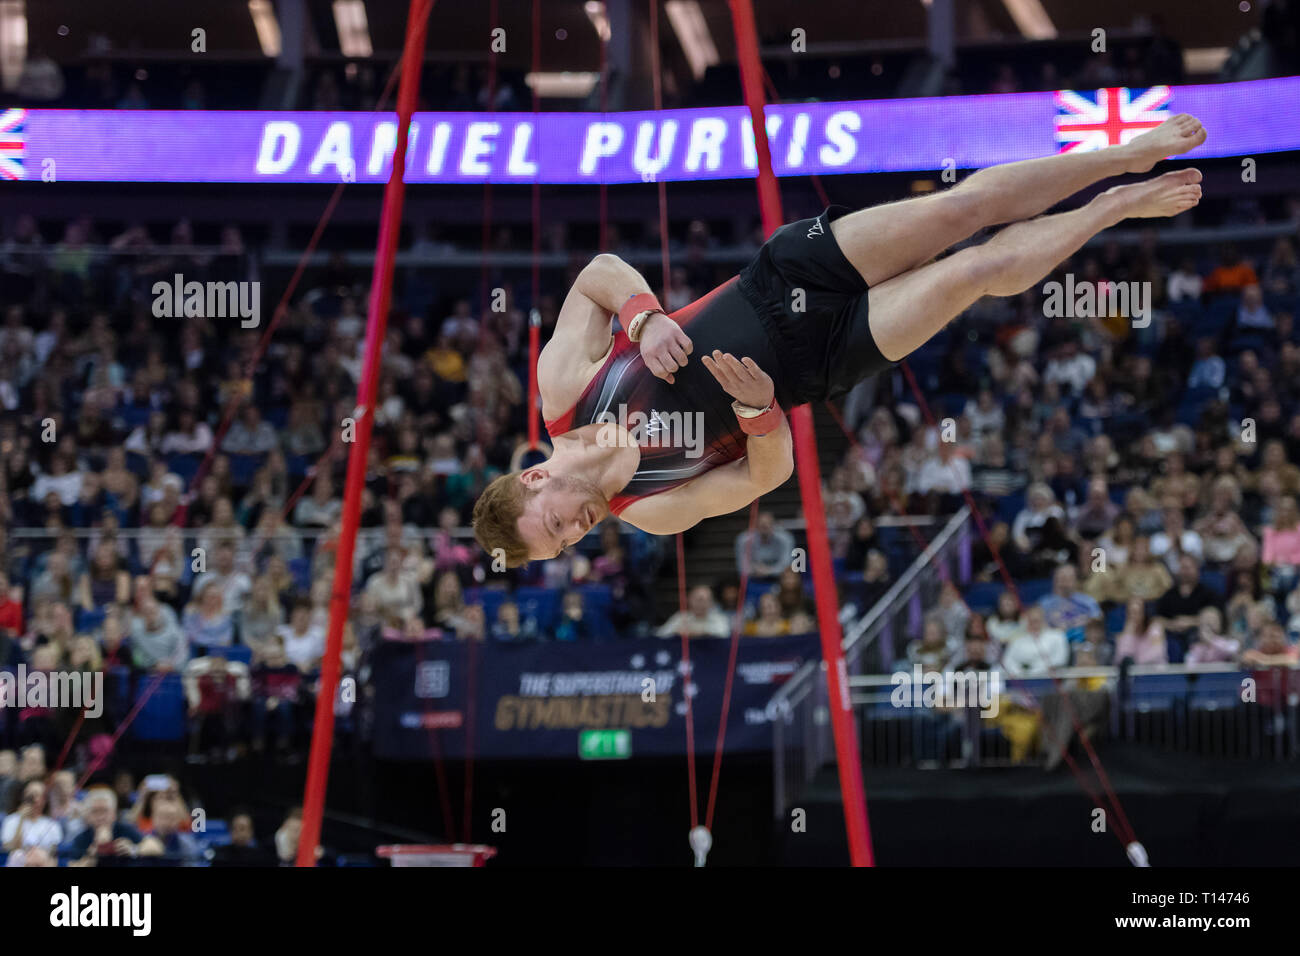 London, UK. 23rd March, 2019. Daniel Purvis performs Floor Exercise during the Matchroom Multisport presents the 2019 Superstars of Gymnastics at The O2 Arena on Saturday, 23 March 2019. LONDON ENGLAND. Credit: Taka G Wu/Alamy News Stock Photo